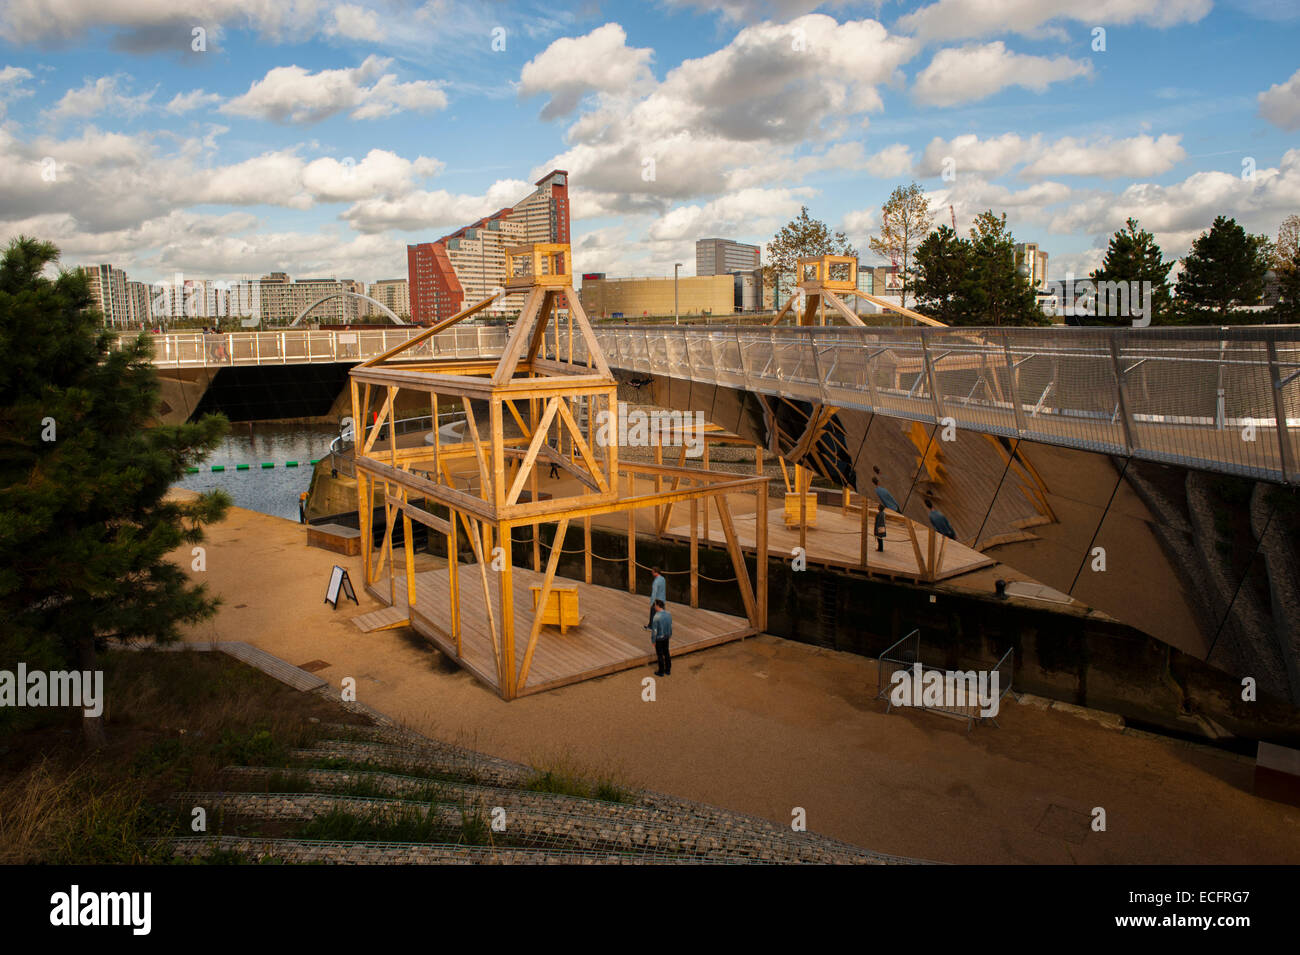 Newtons Cottage art installation at the queen Elizabeth Olympic Park Stratford. Stock Photo